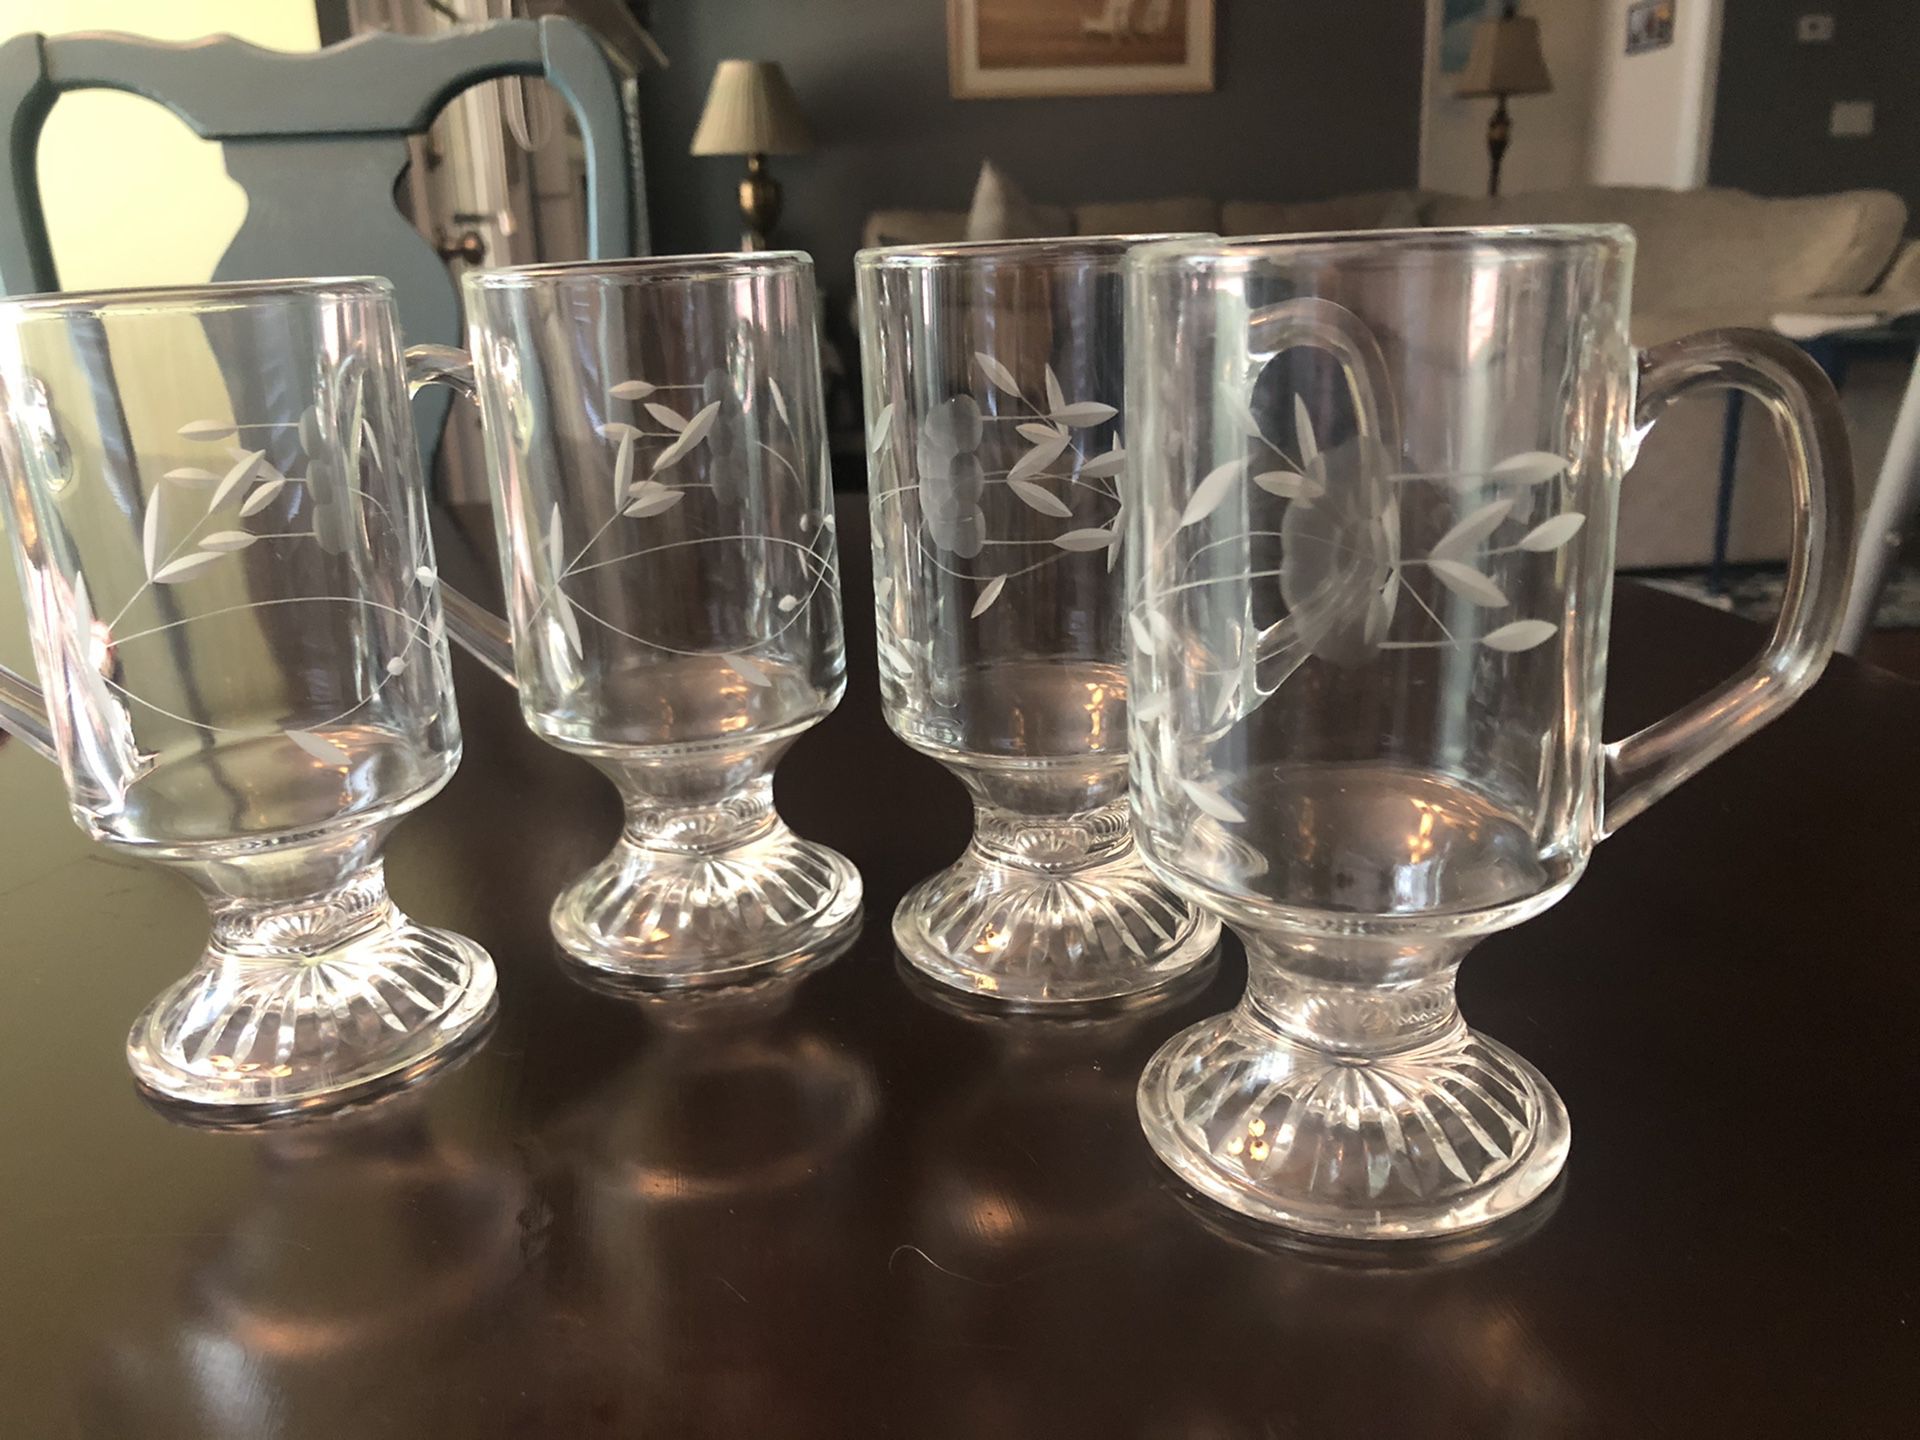 Princess House mugs and other miscellaneous glasses